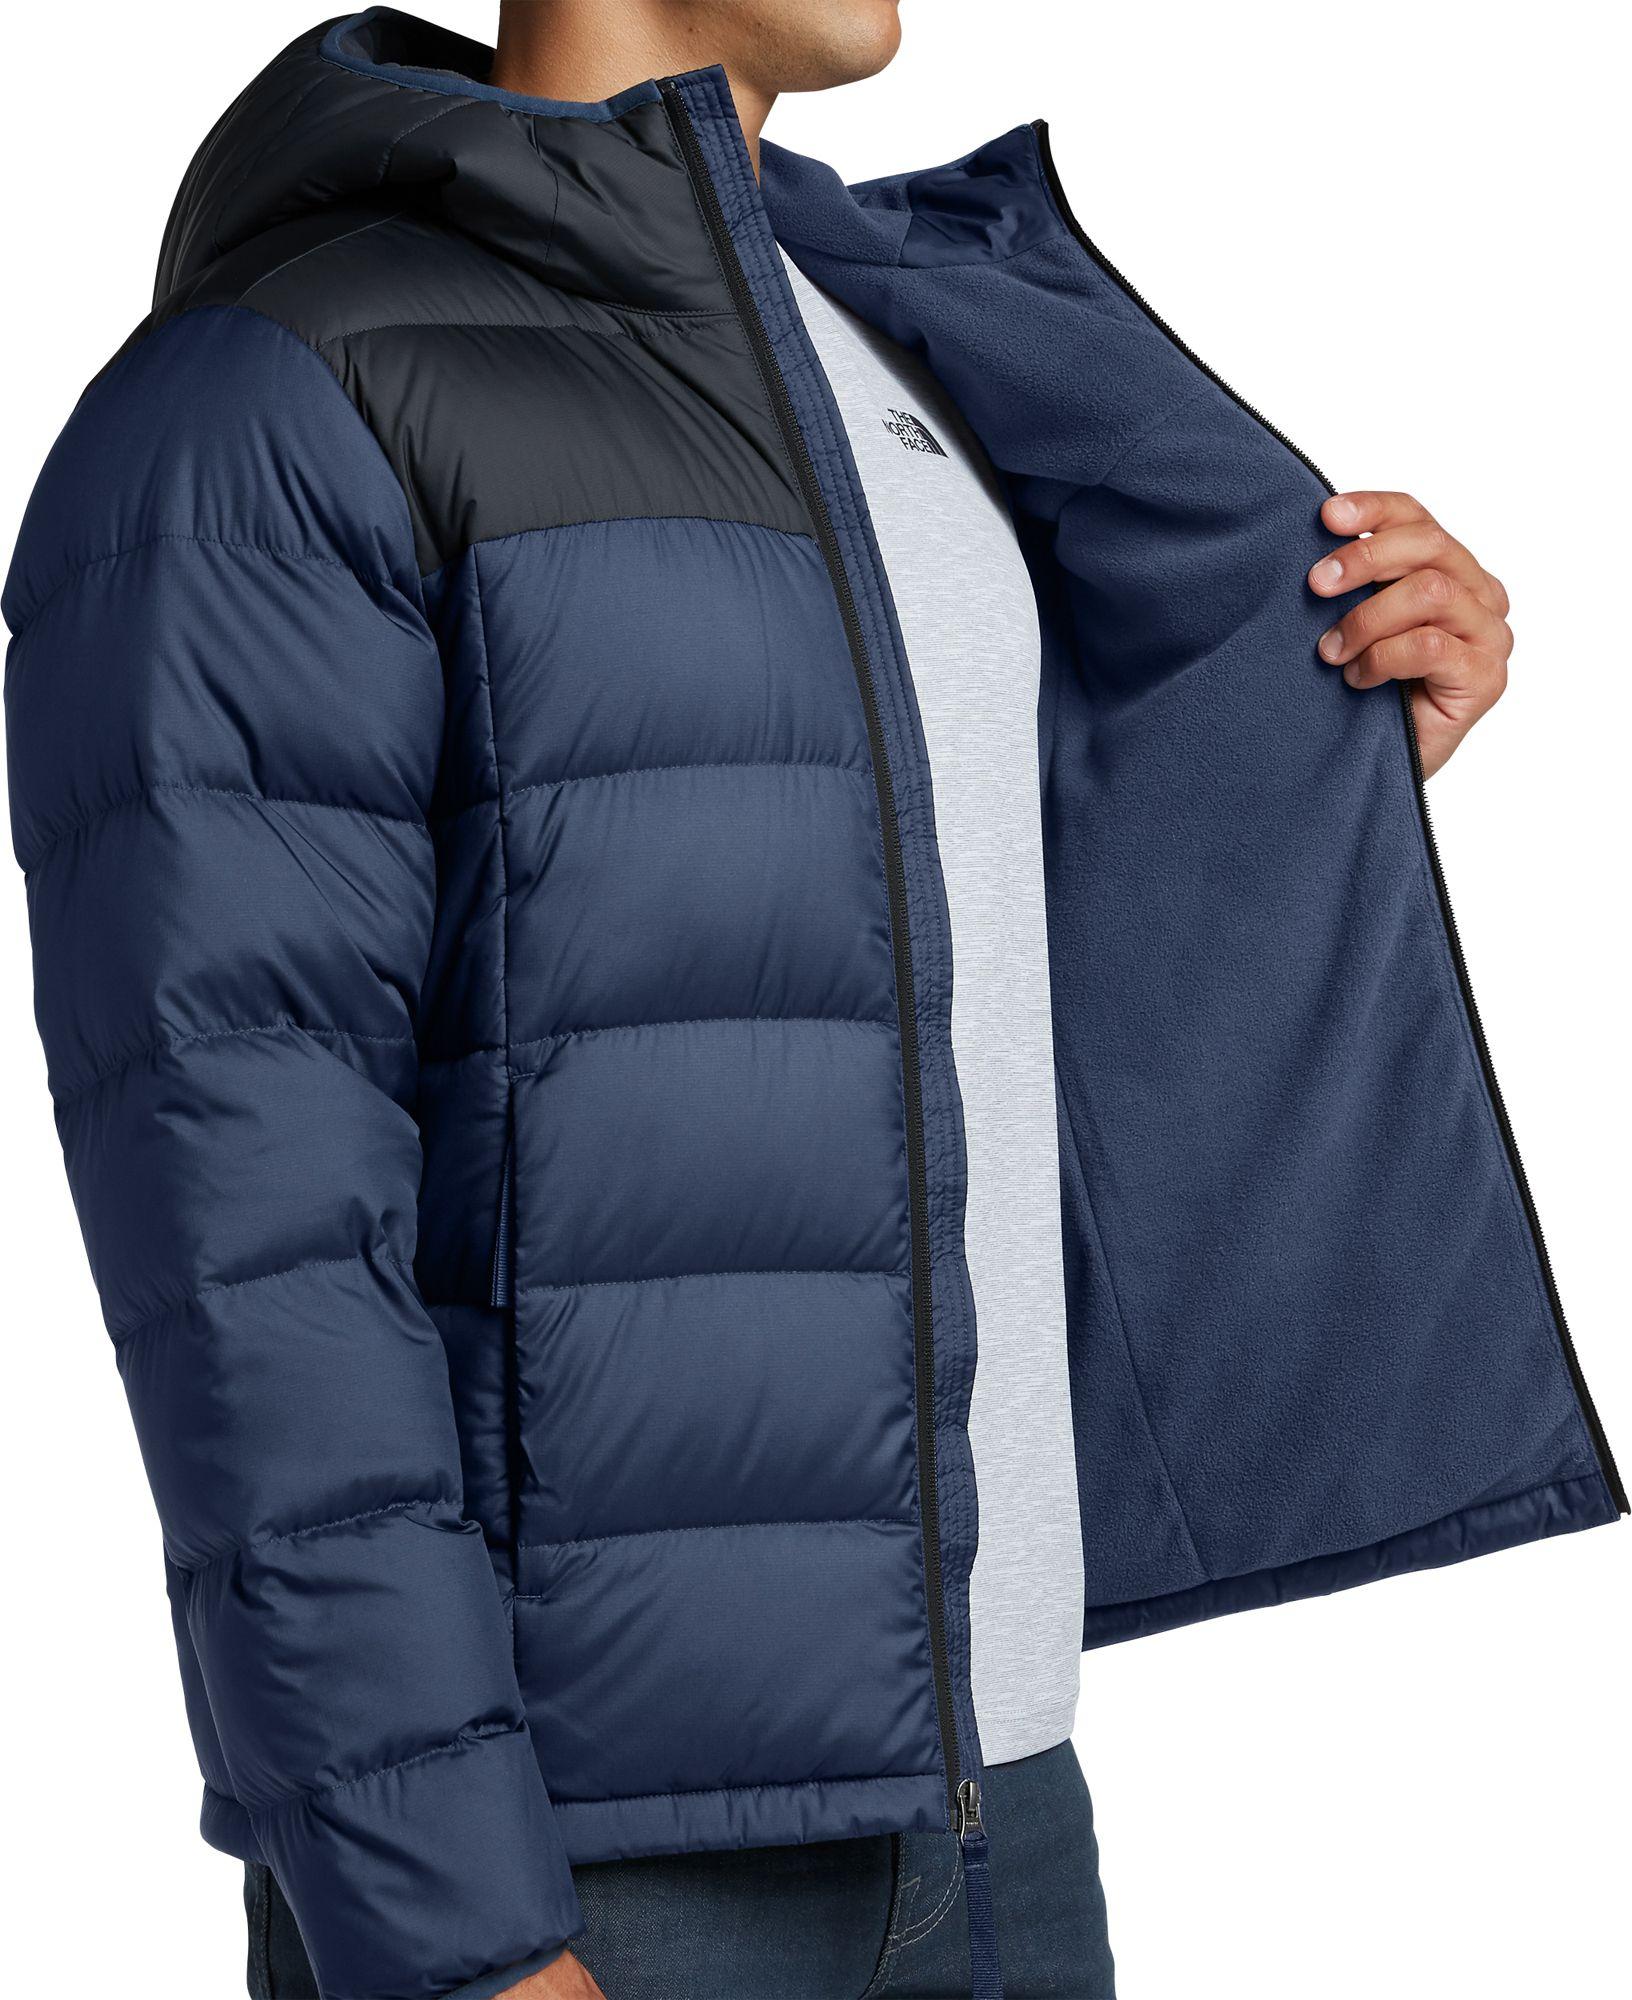 north face blue winter jacket